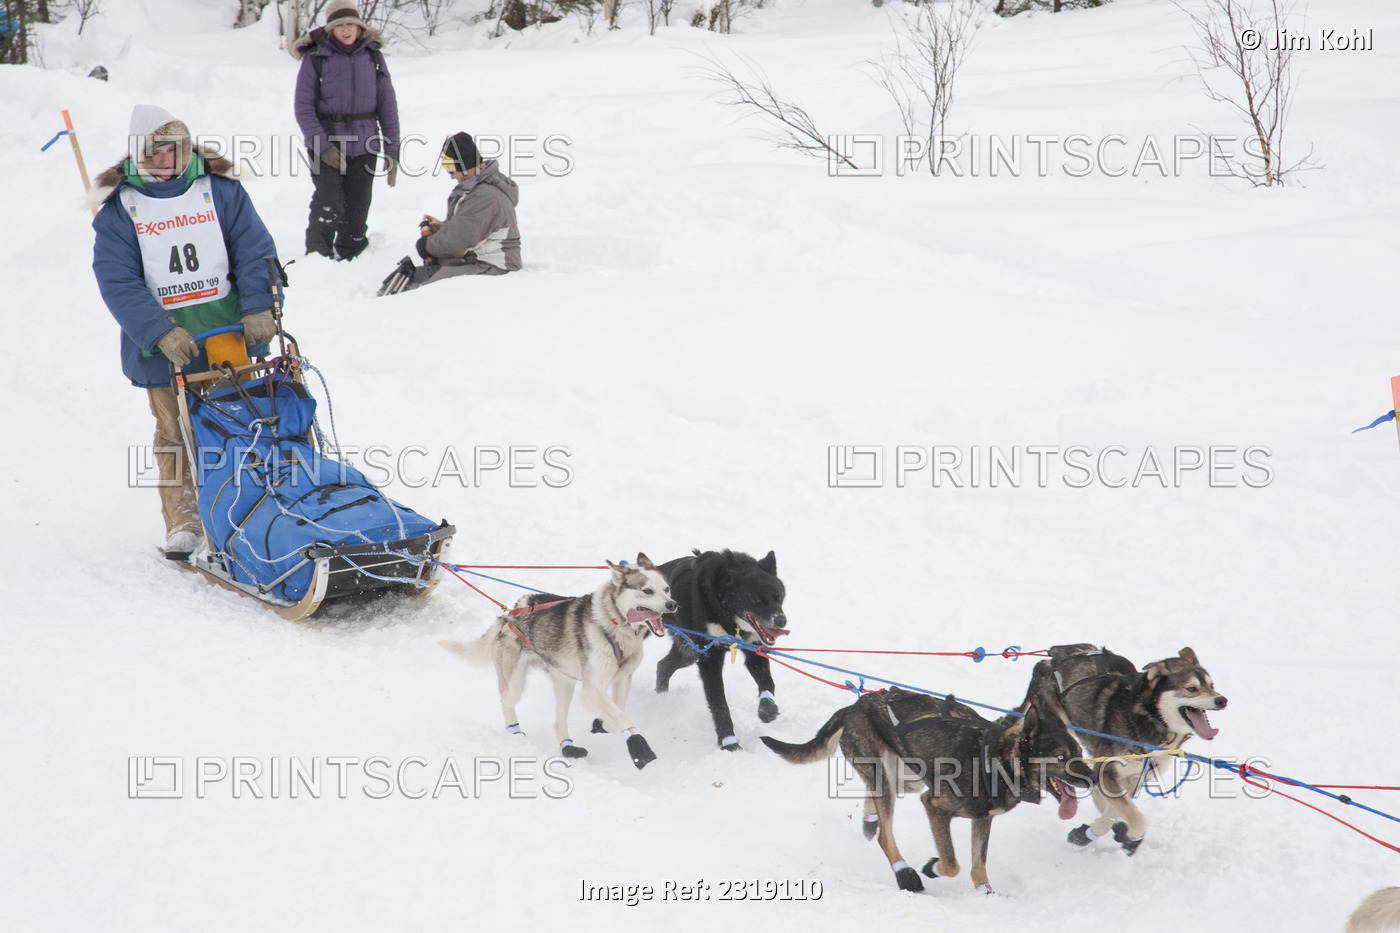 Wade Marrs At The Restart Of The 2009 Iditarod In Willow Alaska